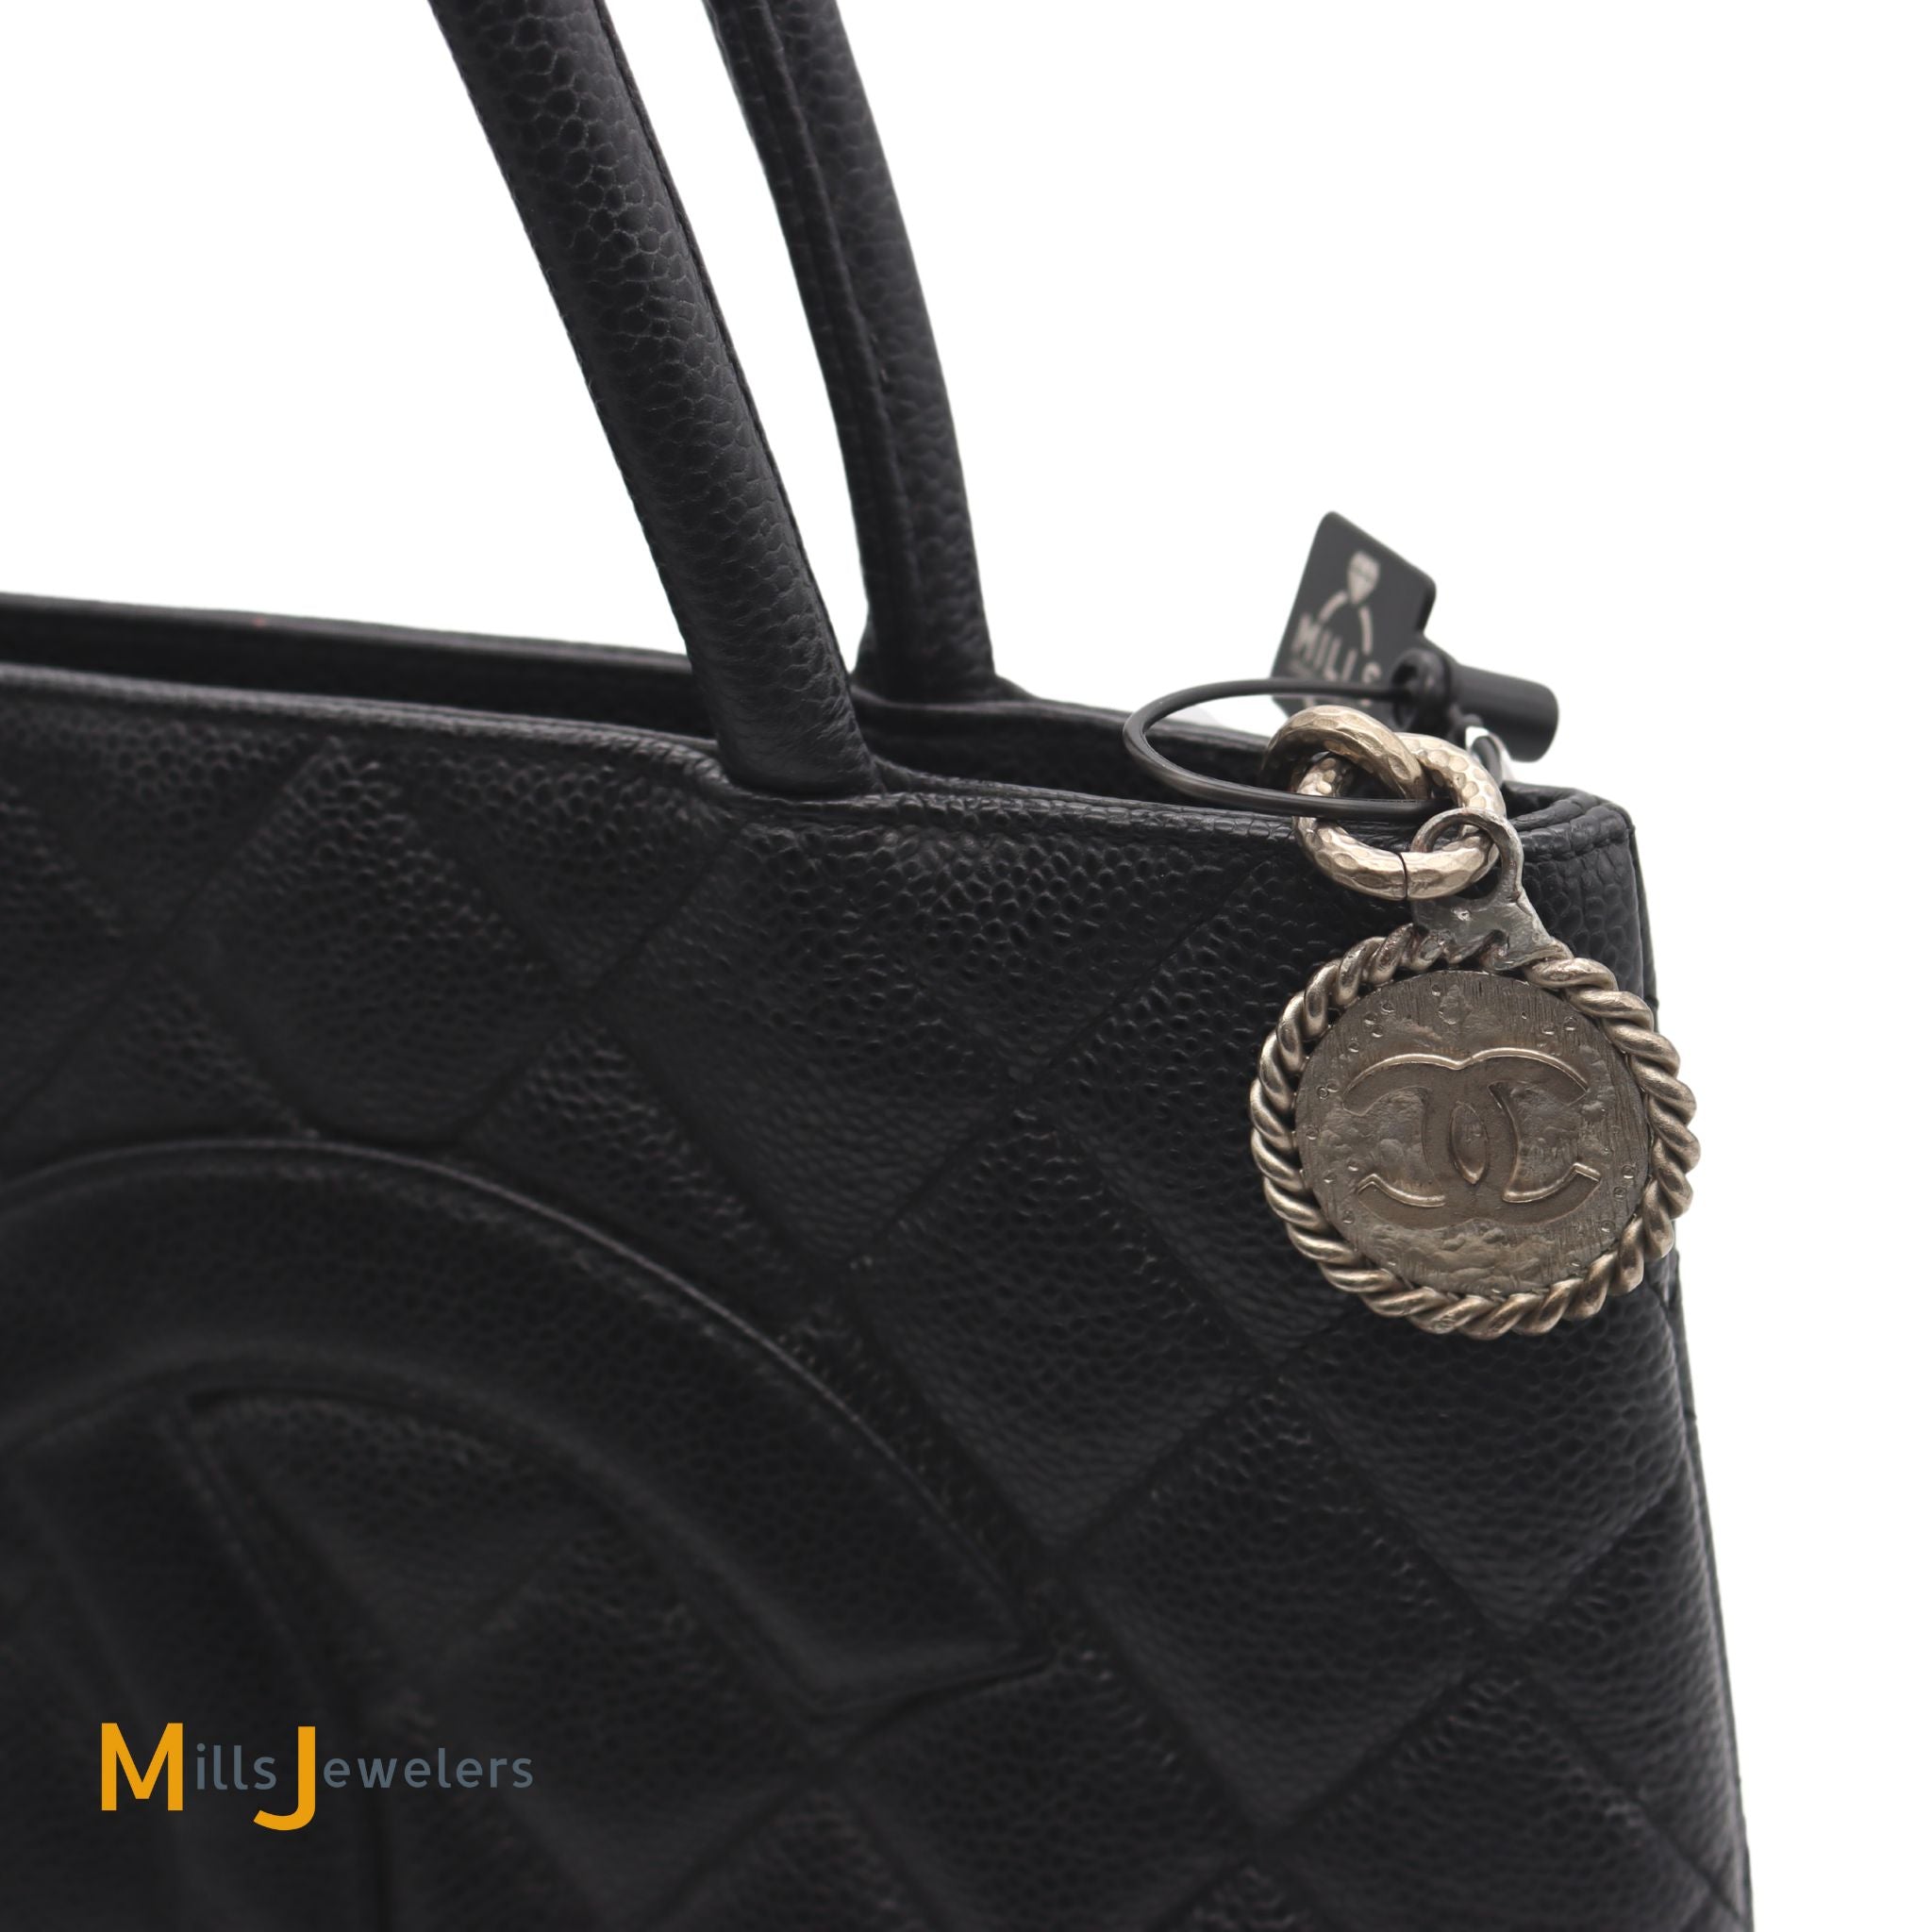 Chanel Reprint Caviar Quilted Medallion Black Tote Bag